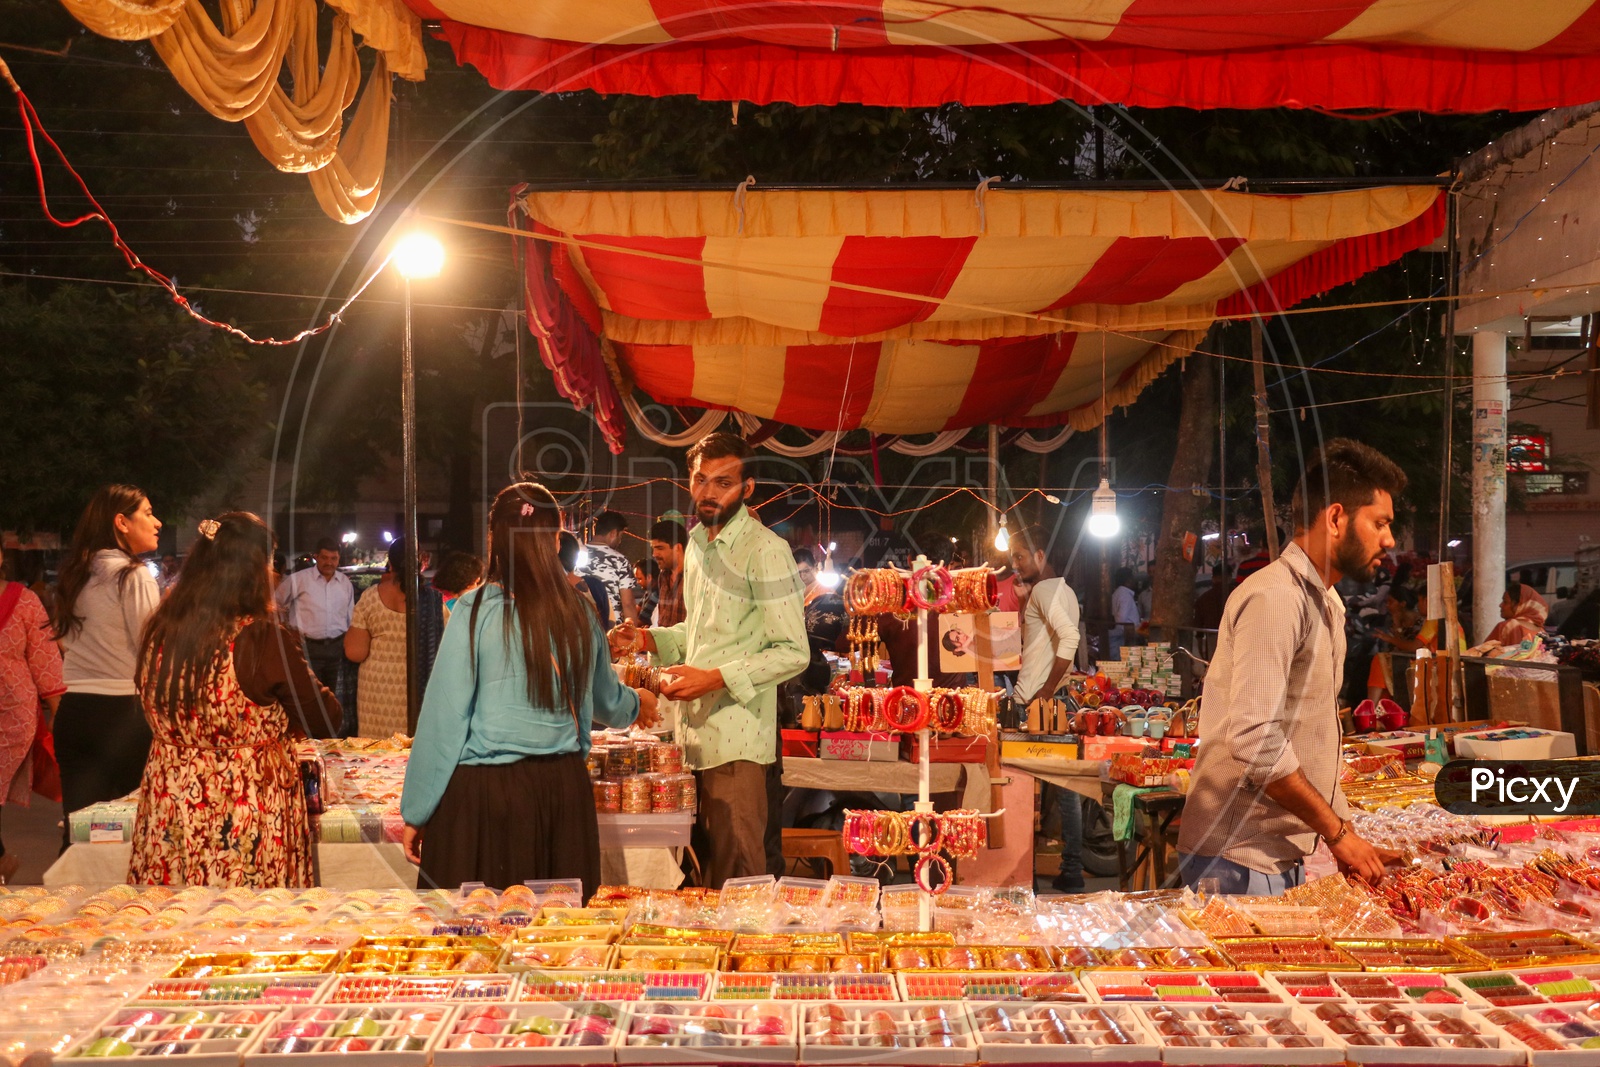 Women buying bangles at a street vendor on the eve of Karva chauth